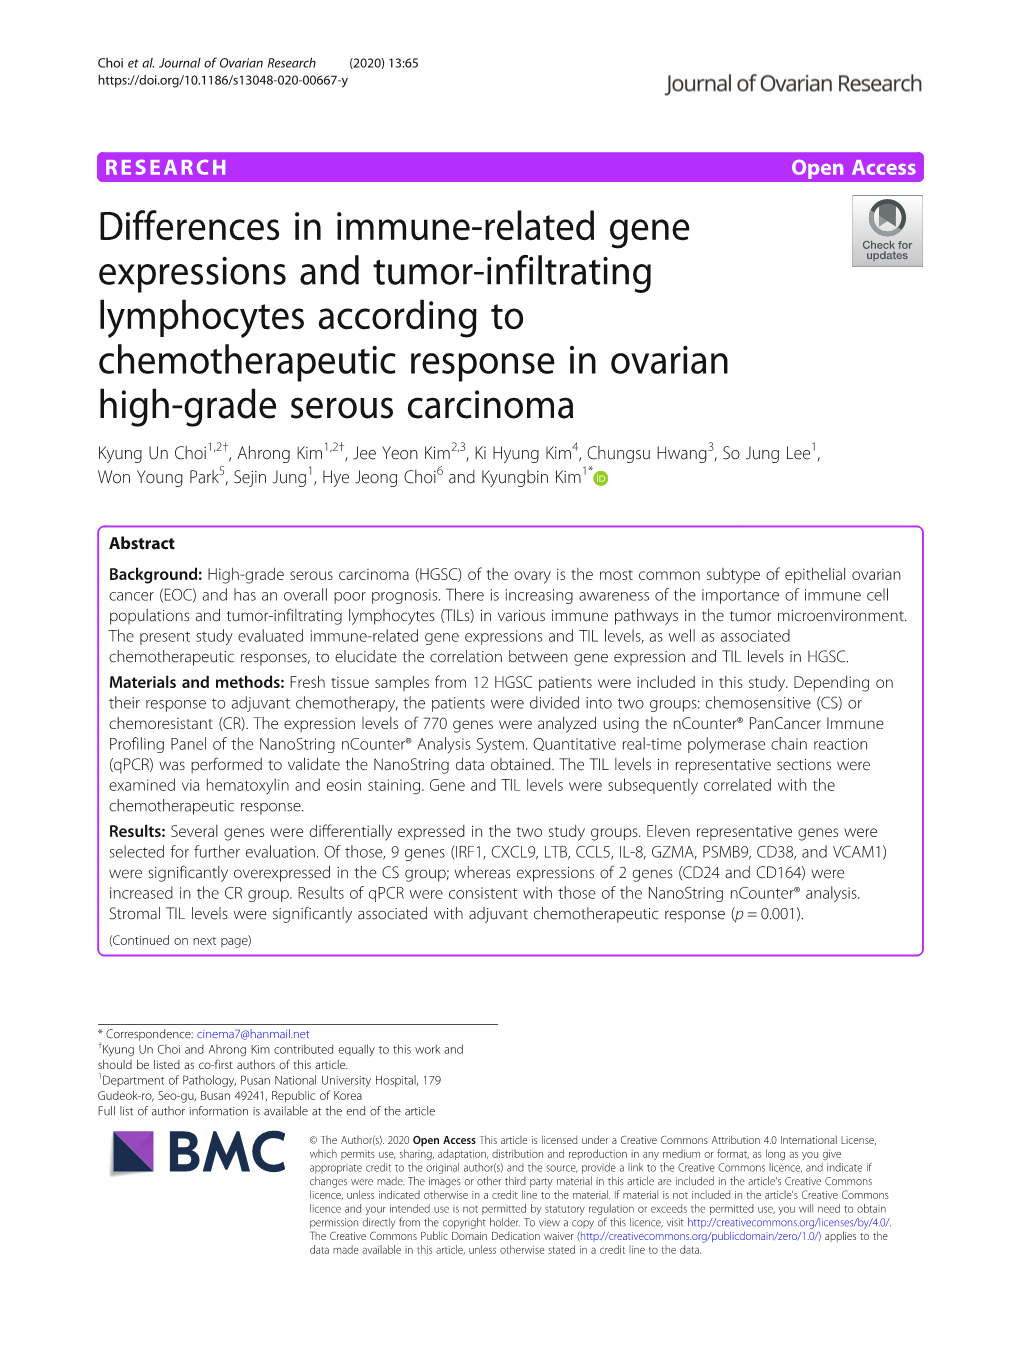 Differences in Immune-Related Gene Expressions and Tumor-Infiltrating Lymphocytes According to Chemotherapeutic Response in Ovar